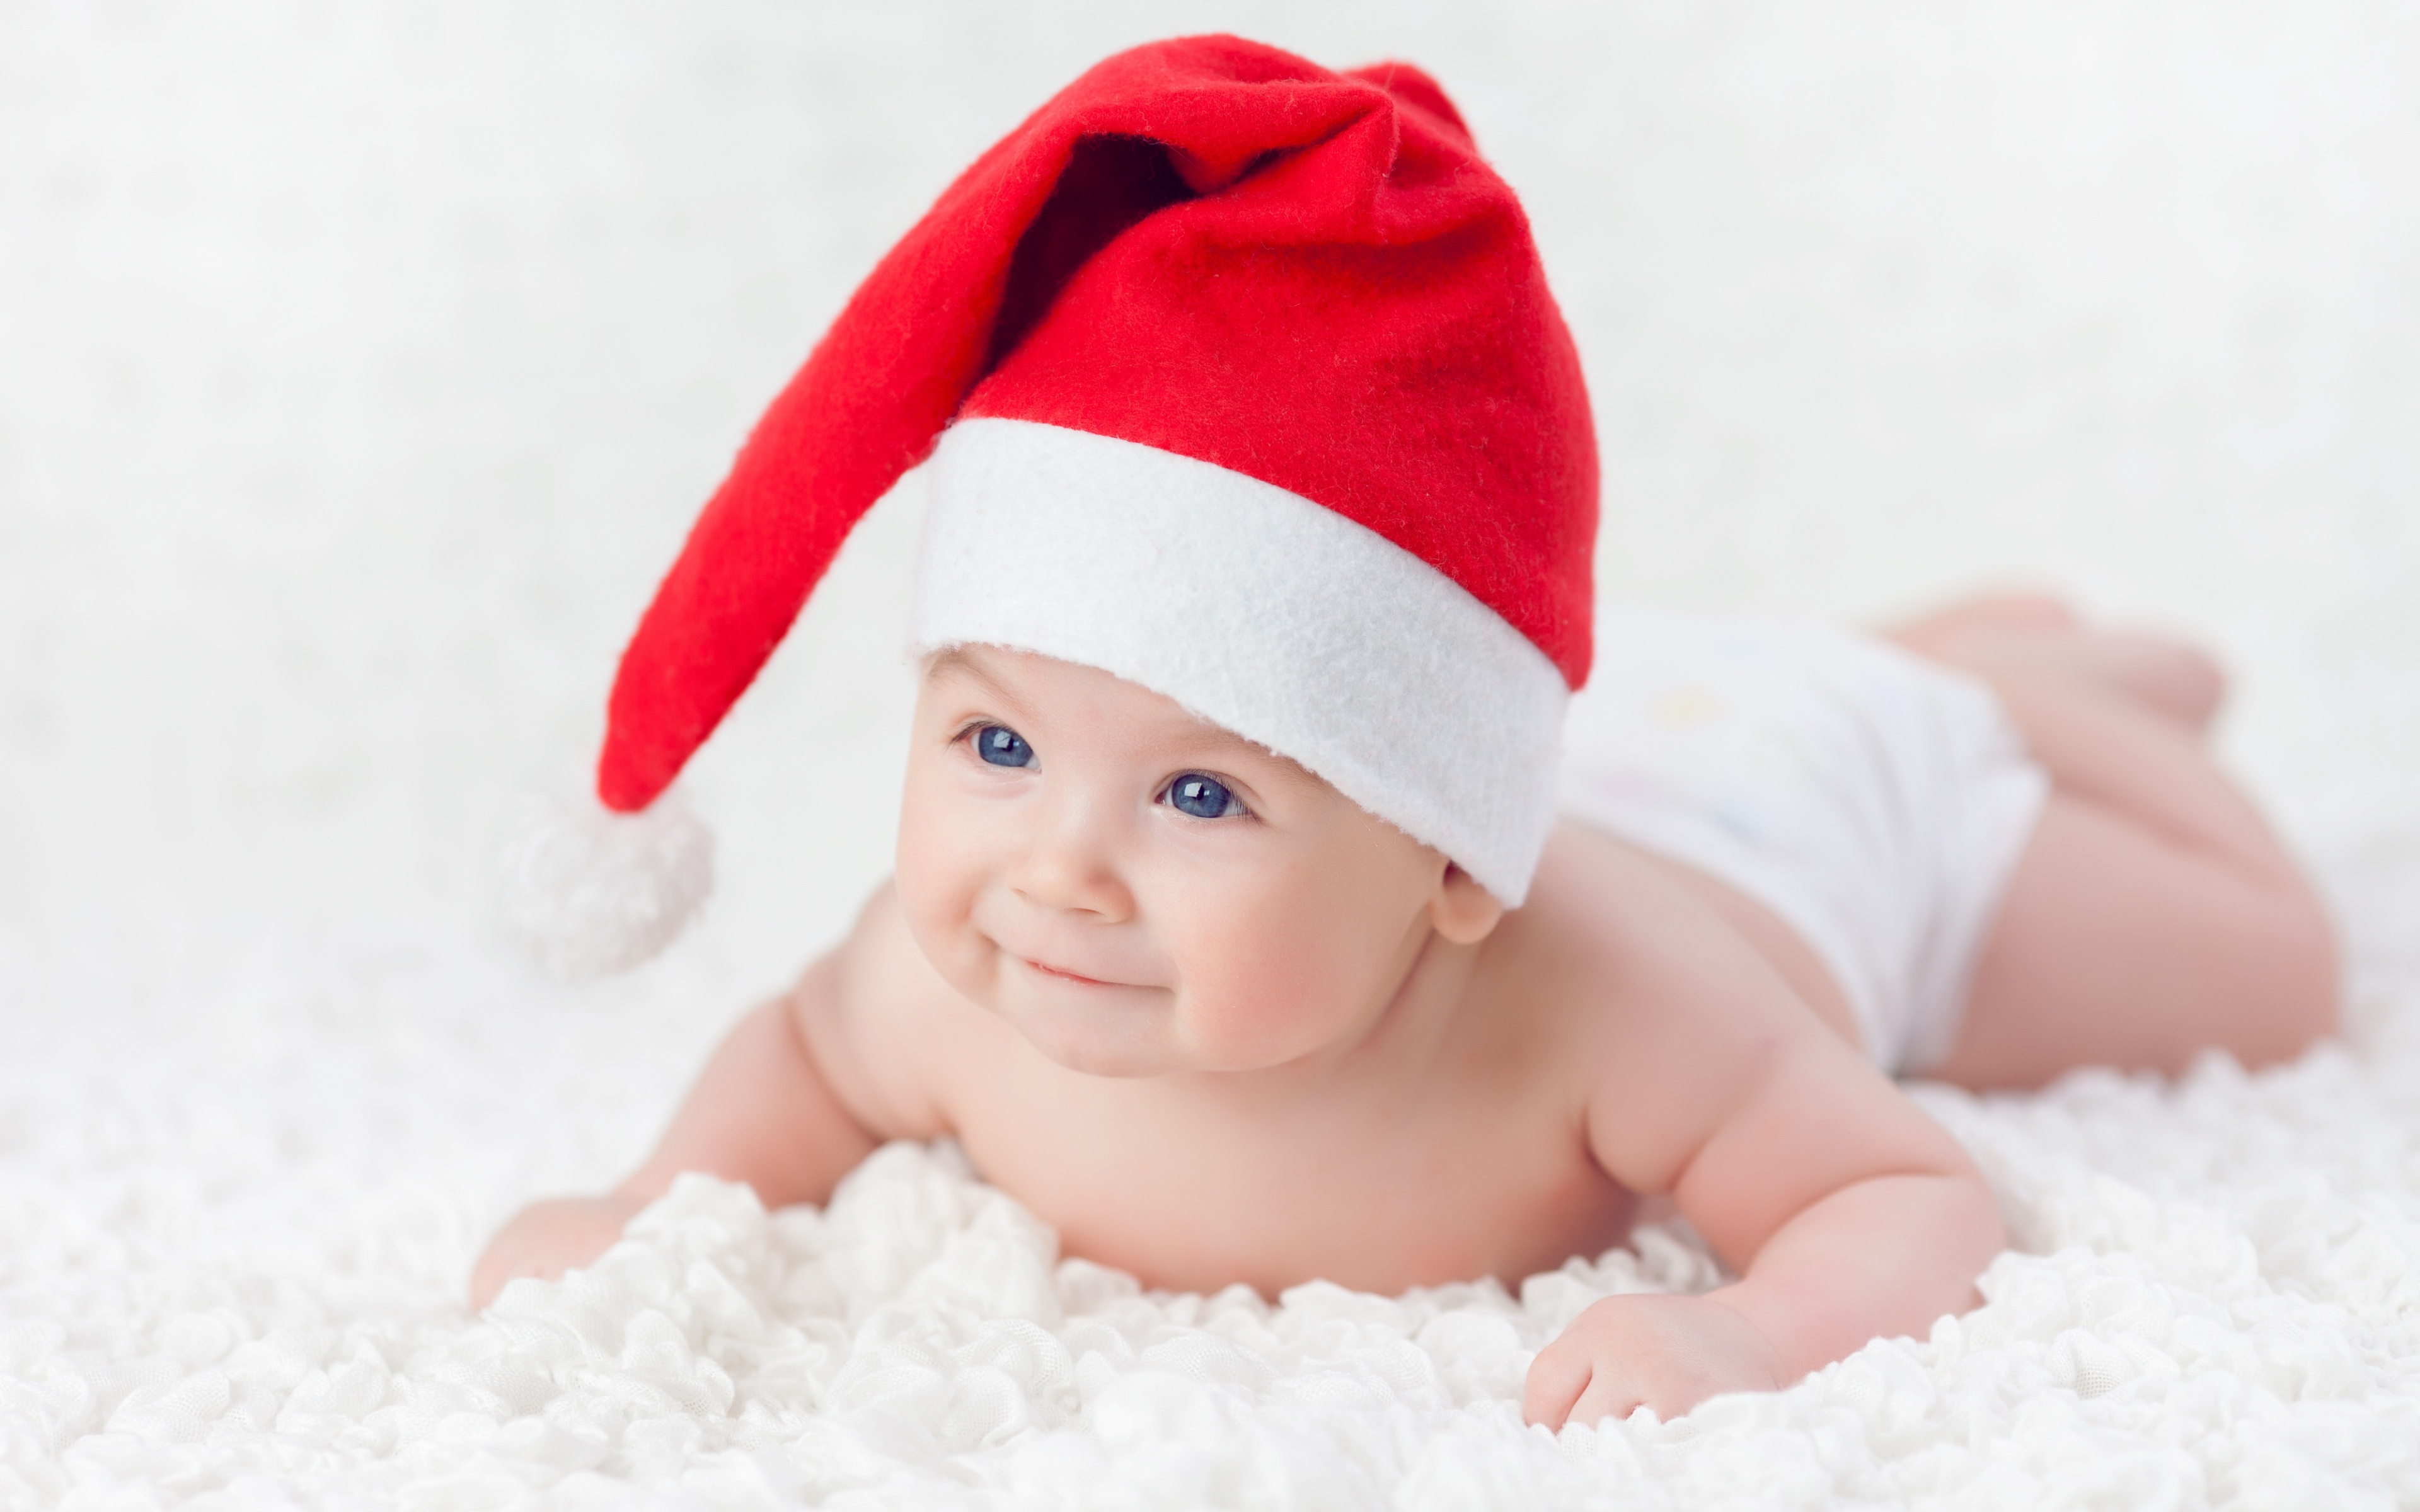 Cool Wallpaper Child Ship Hd Cute Wallpapers For Mobile - Baby With Xmas Cap - HD Wallpaper 